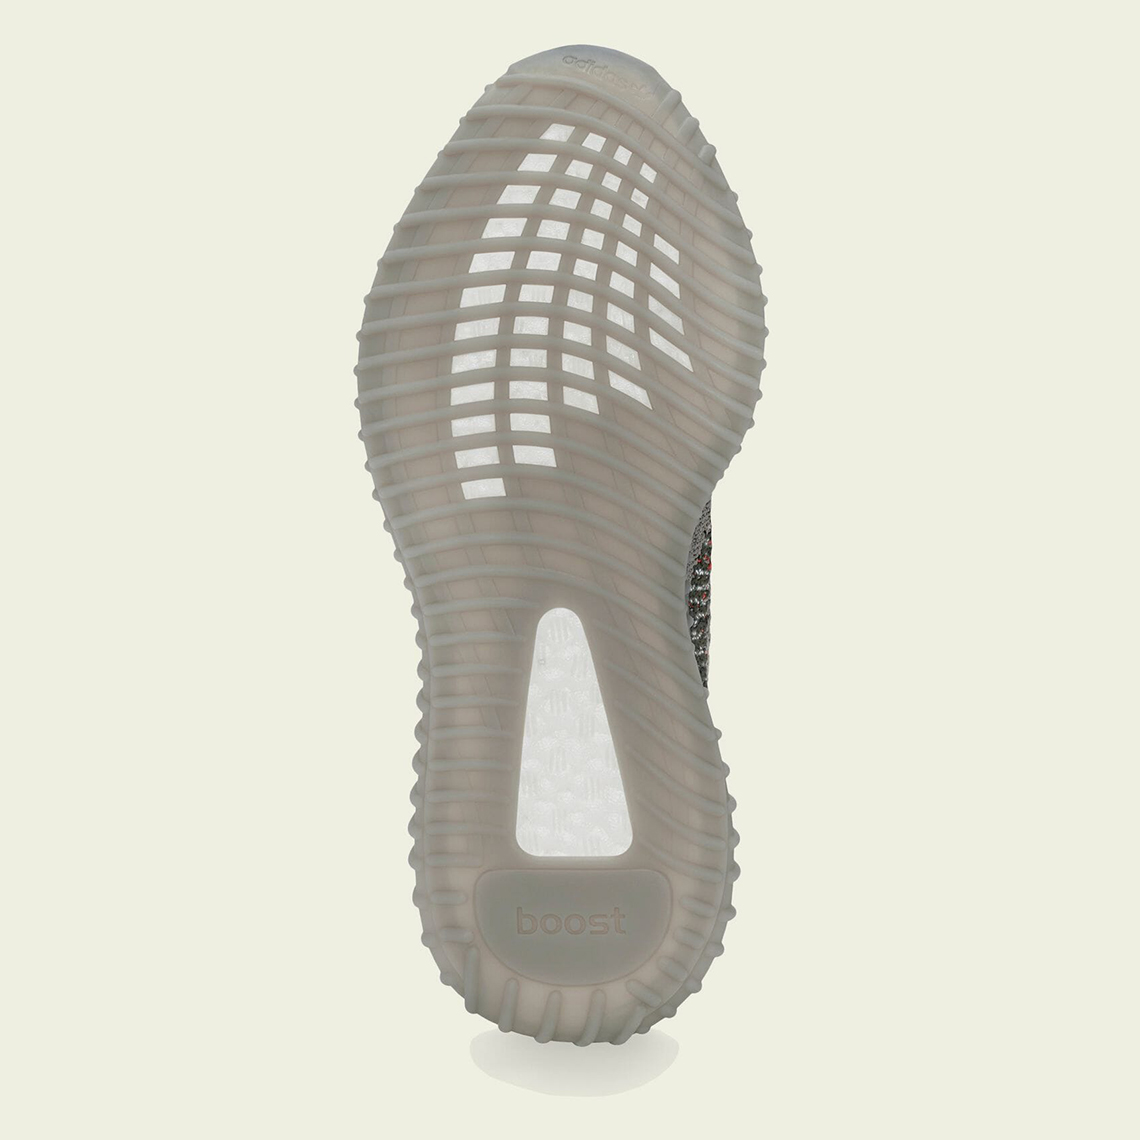 Adidas Yeezy Boost 350 V2 Beluga Reflective Official Images Gw1229 1